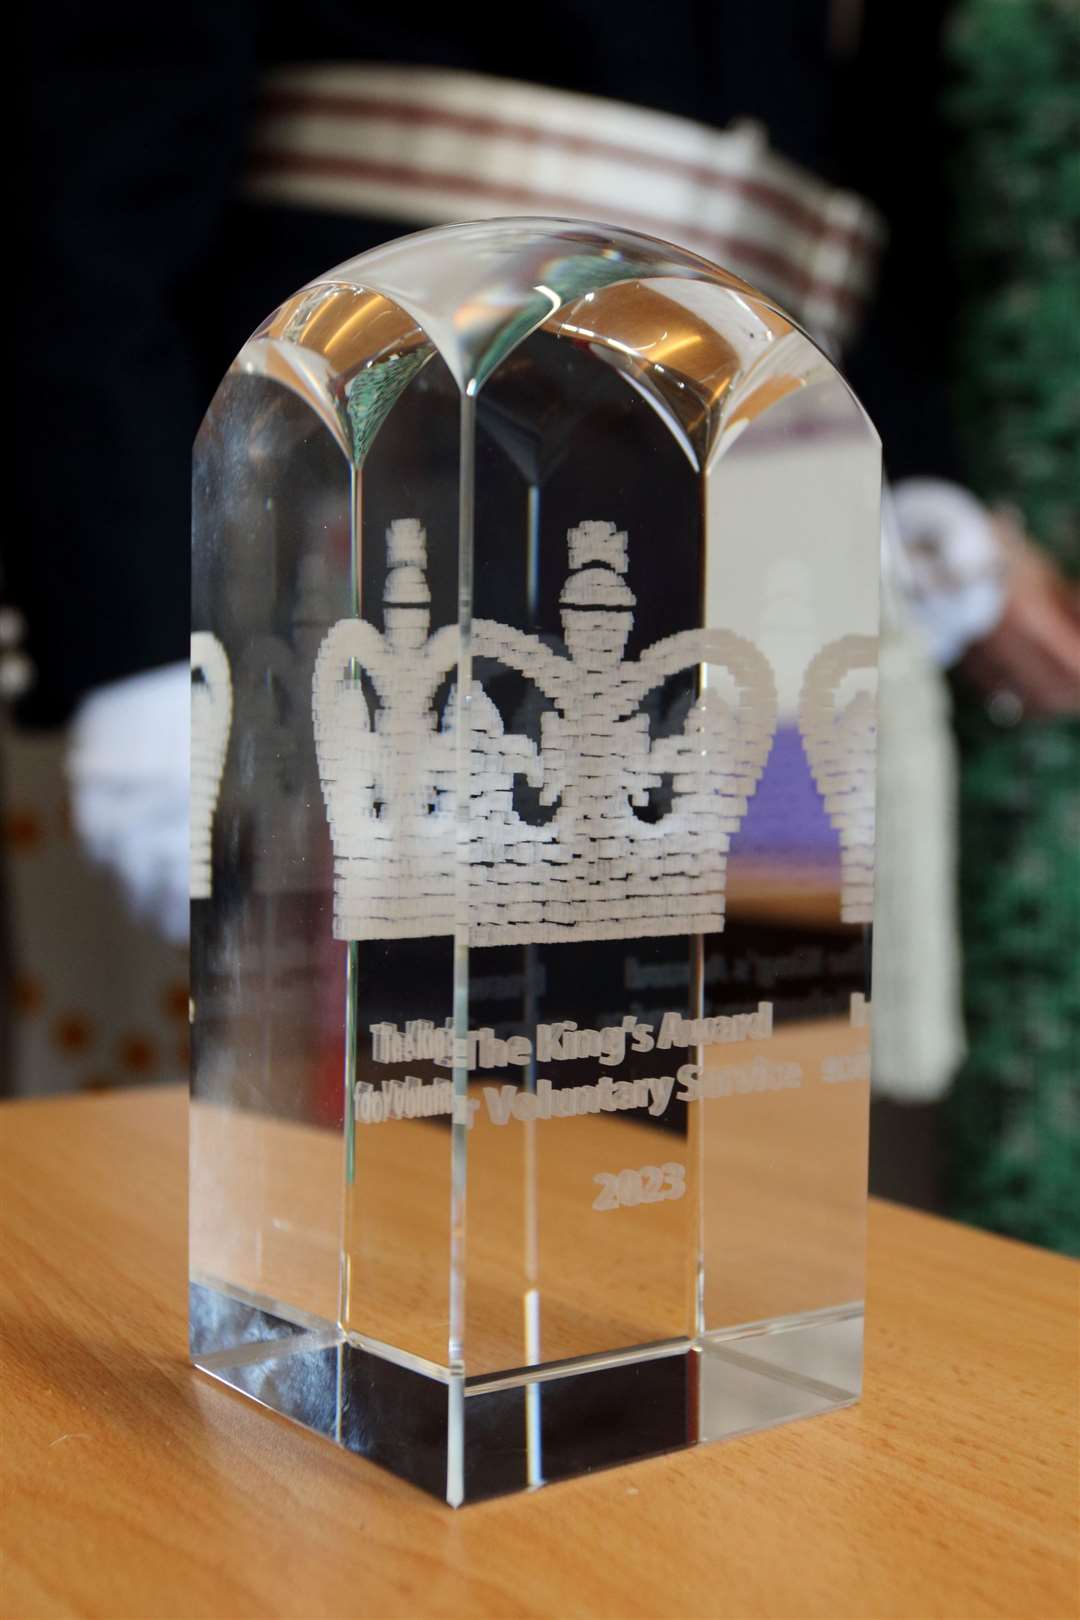 The award recognises the efforts of volunteers.